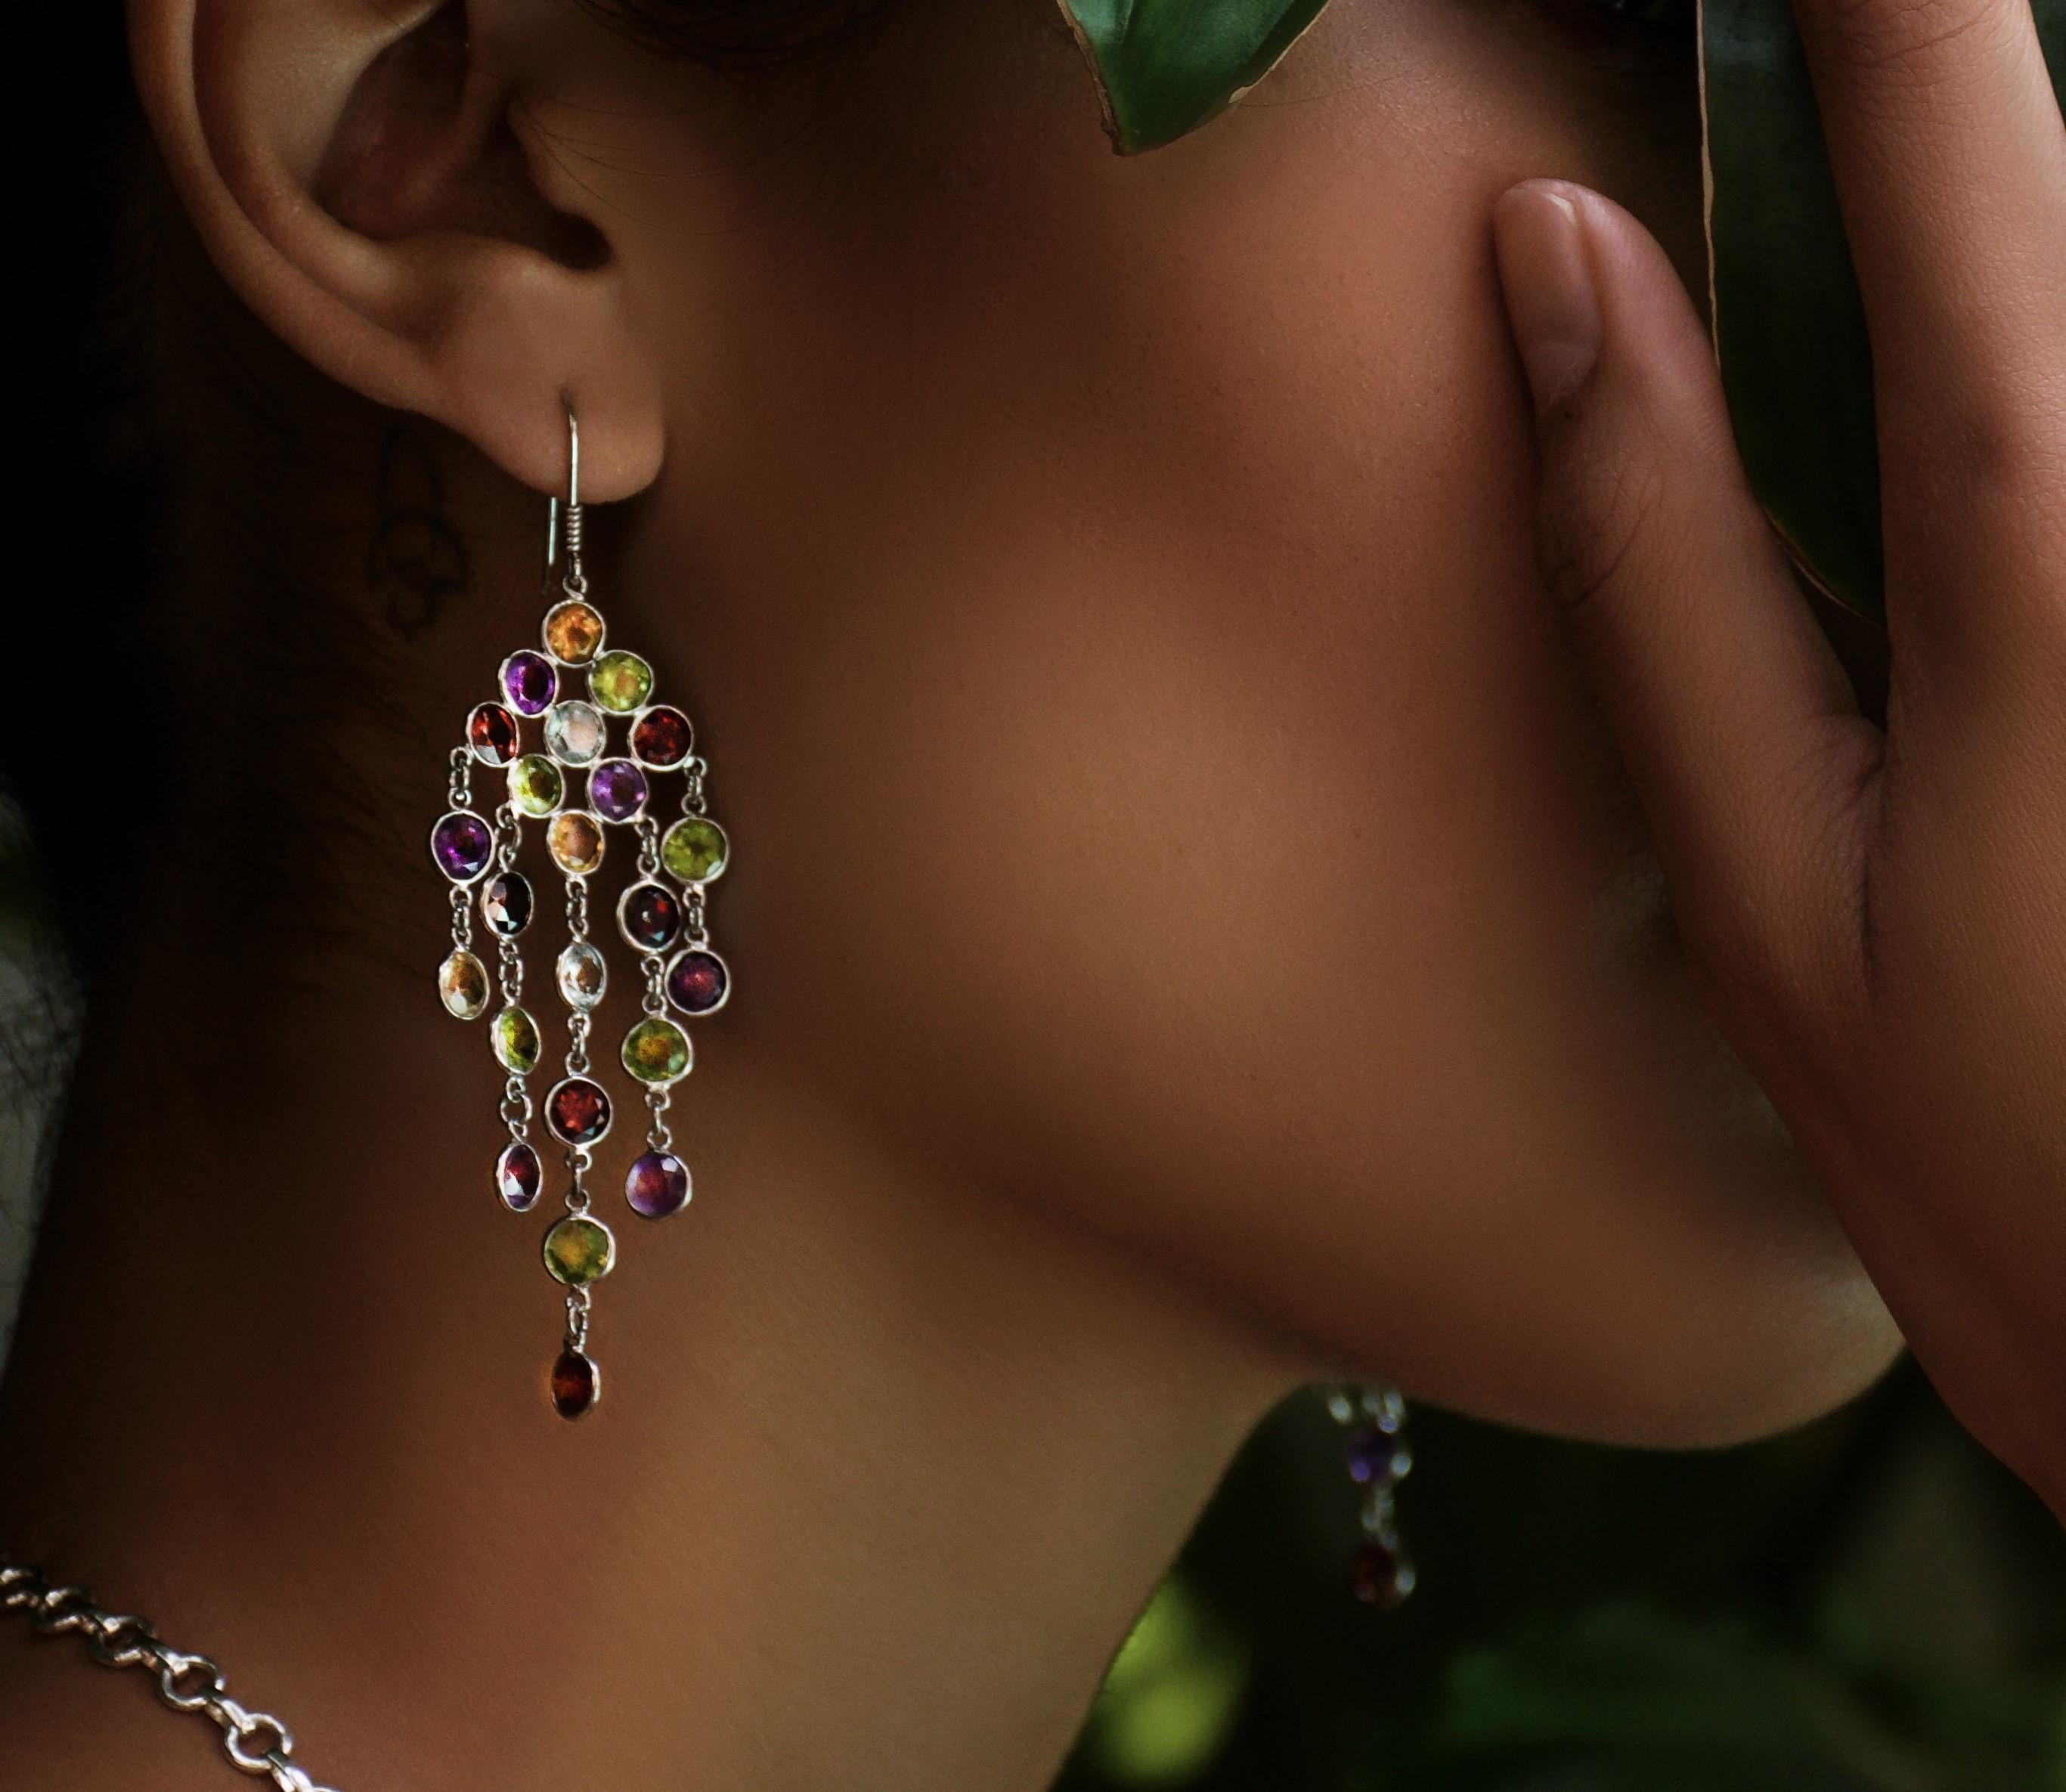 Imagine wearing this beautiful 11.5ctw Mix Gemstone Chandelier Earrings of platinum coated sterling silver, a dazzling showcase of nature's finest hues and captivating gemstones. These exquisite Pin Chandelier earrings feature a harmonious blend of